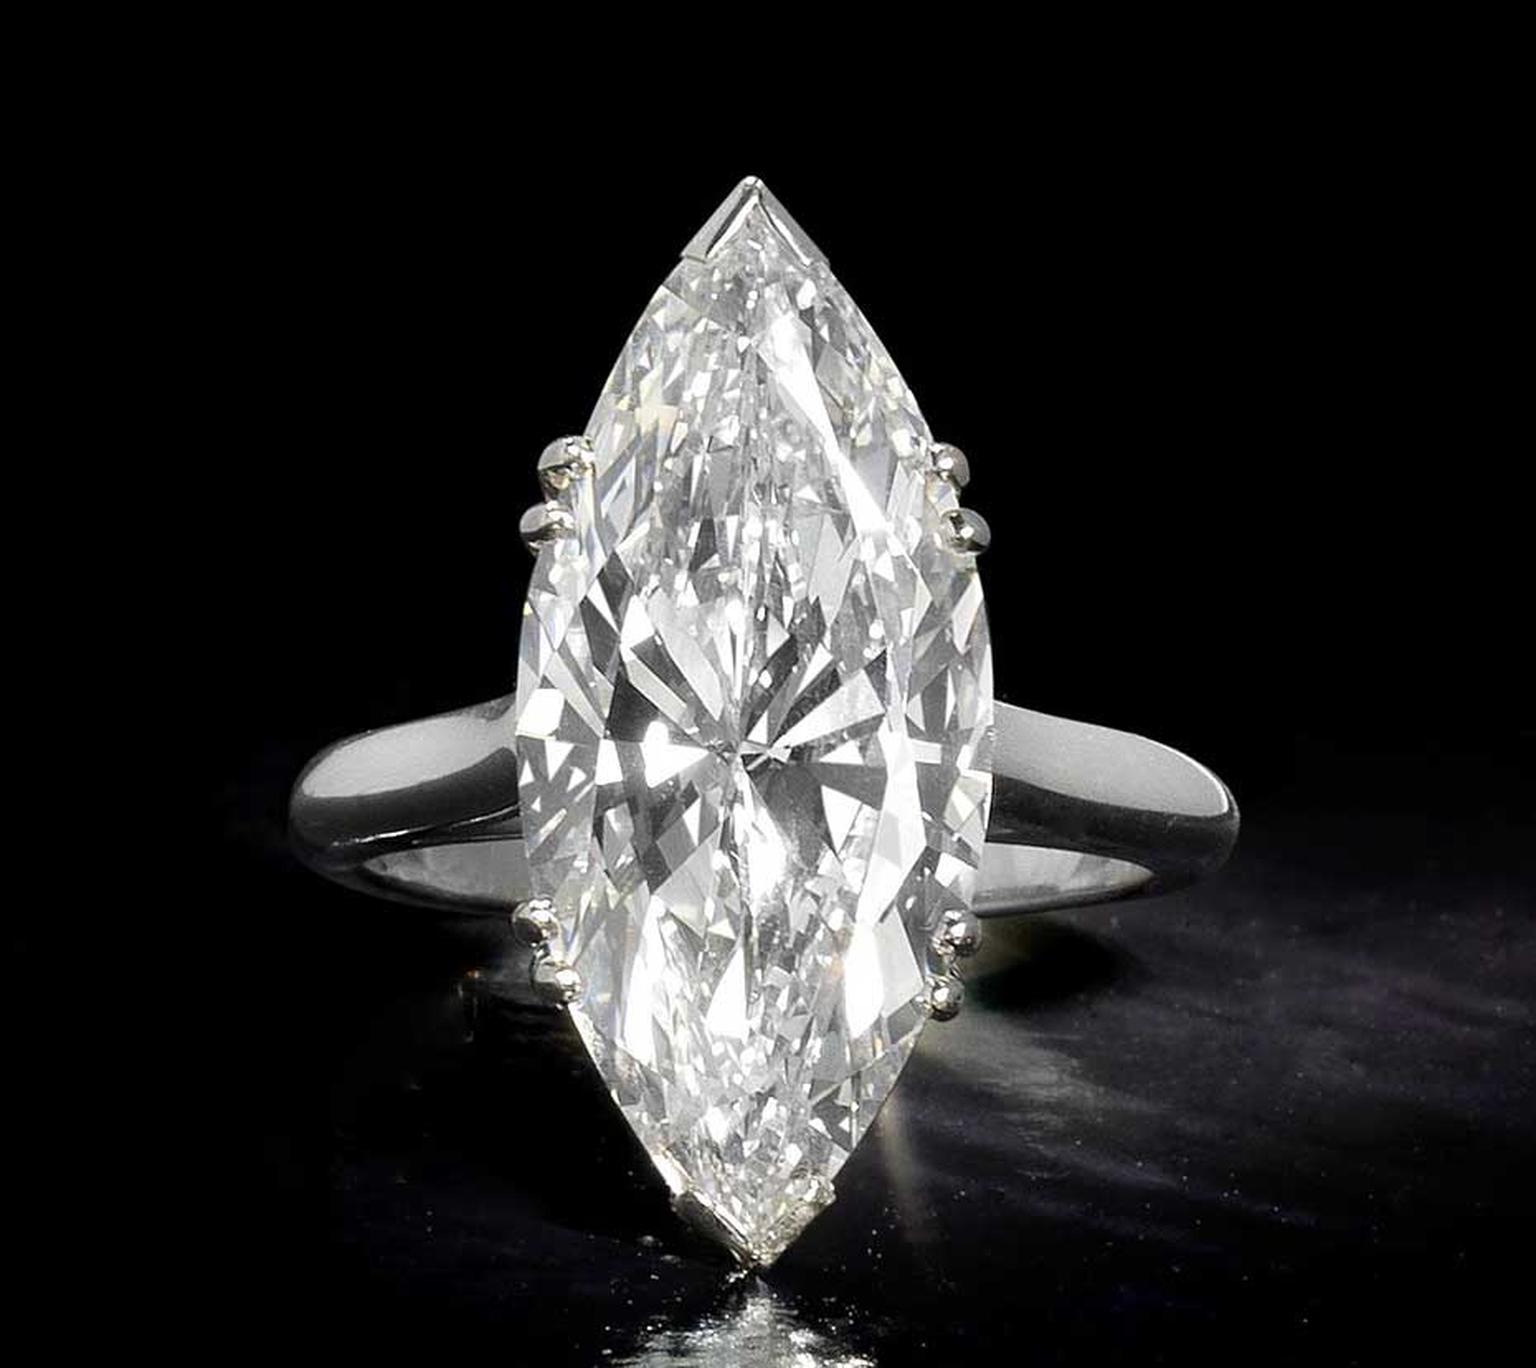 Lot 193, an 8.97ct diamond ring by Piaget (estimate: £250,000-£350,000)